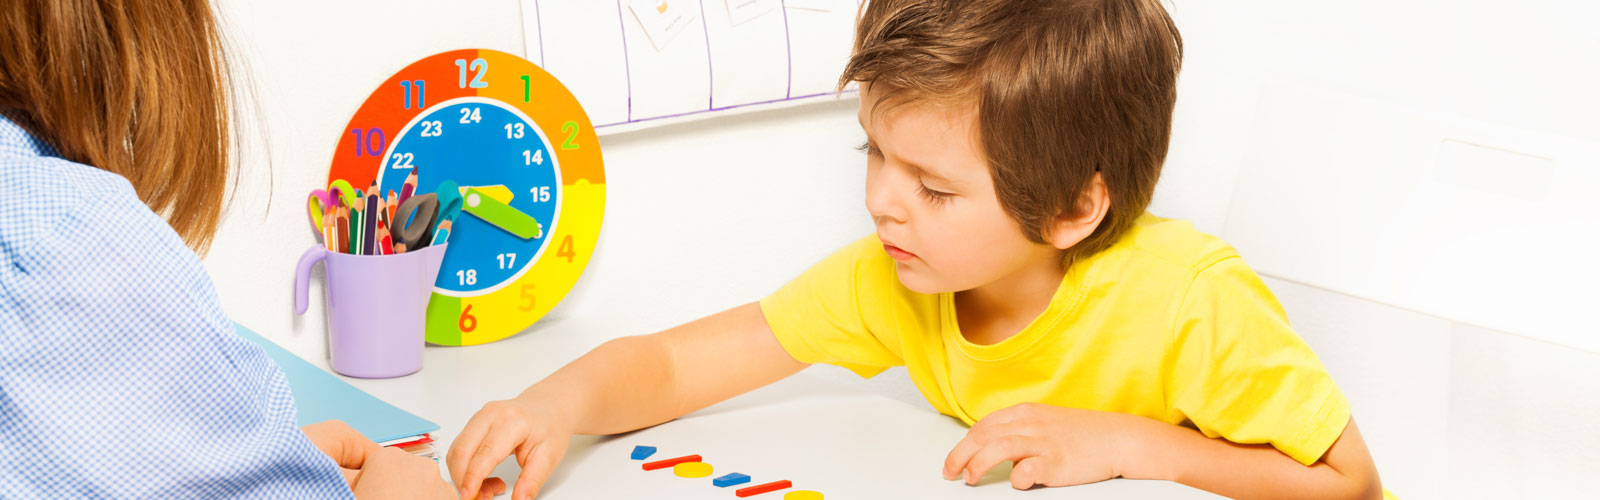 Woman teaches young child. There is a small, colorful clock in the background.